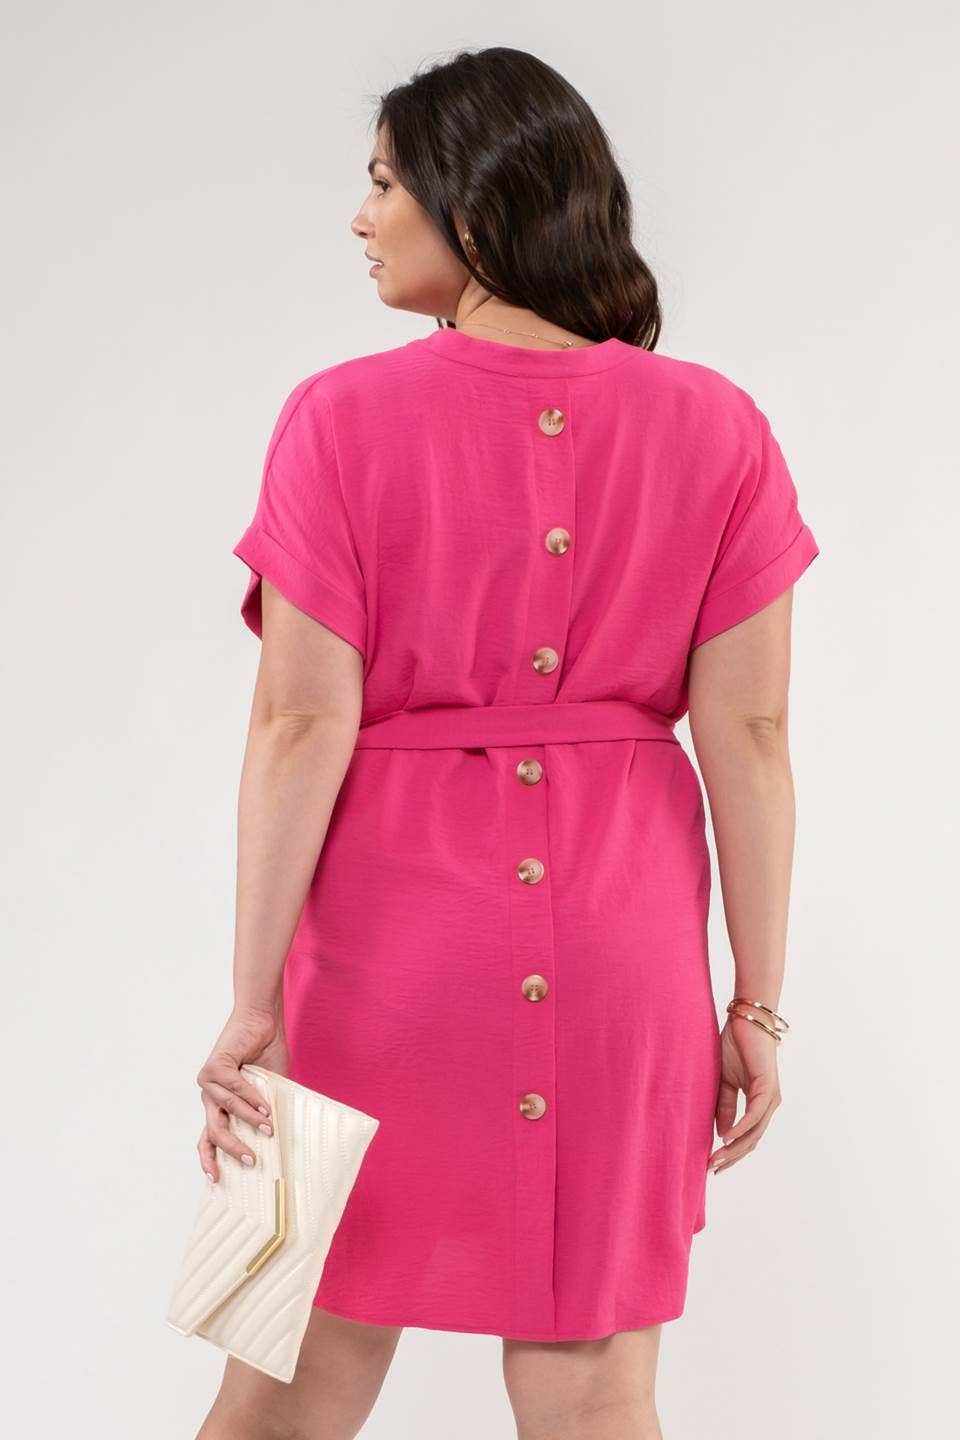 Curvy Bethany Back Buttoned Belted Mini Dress